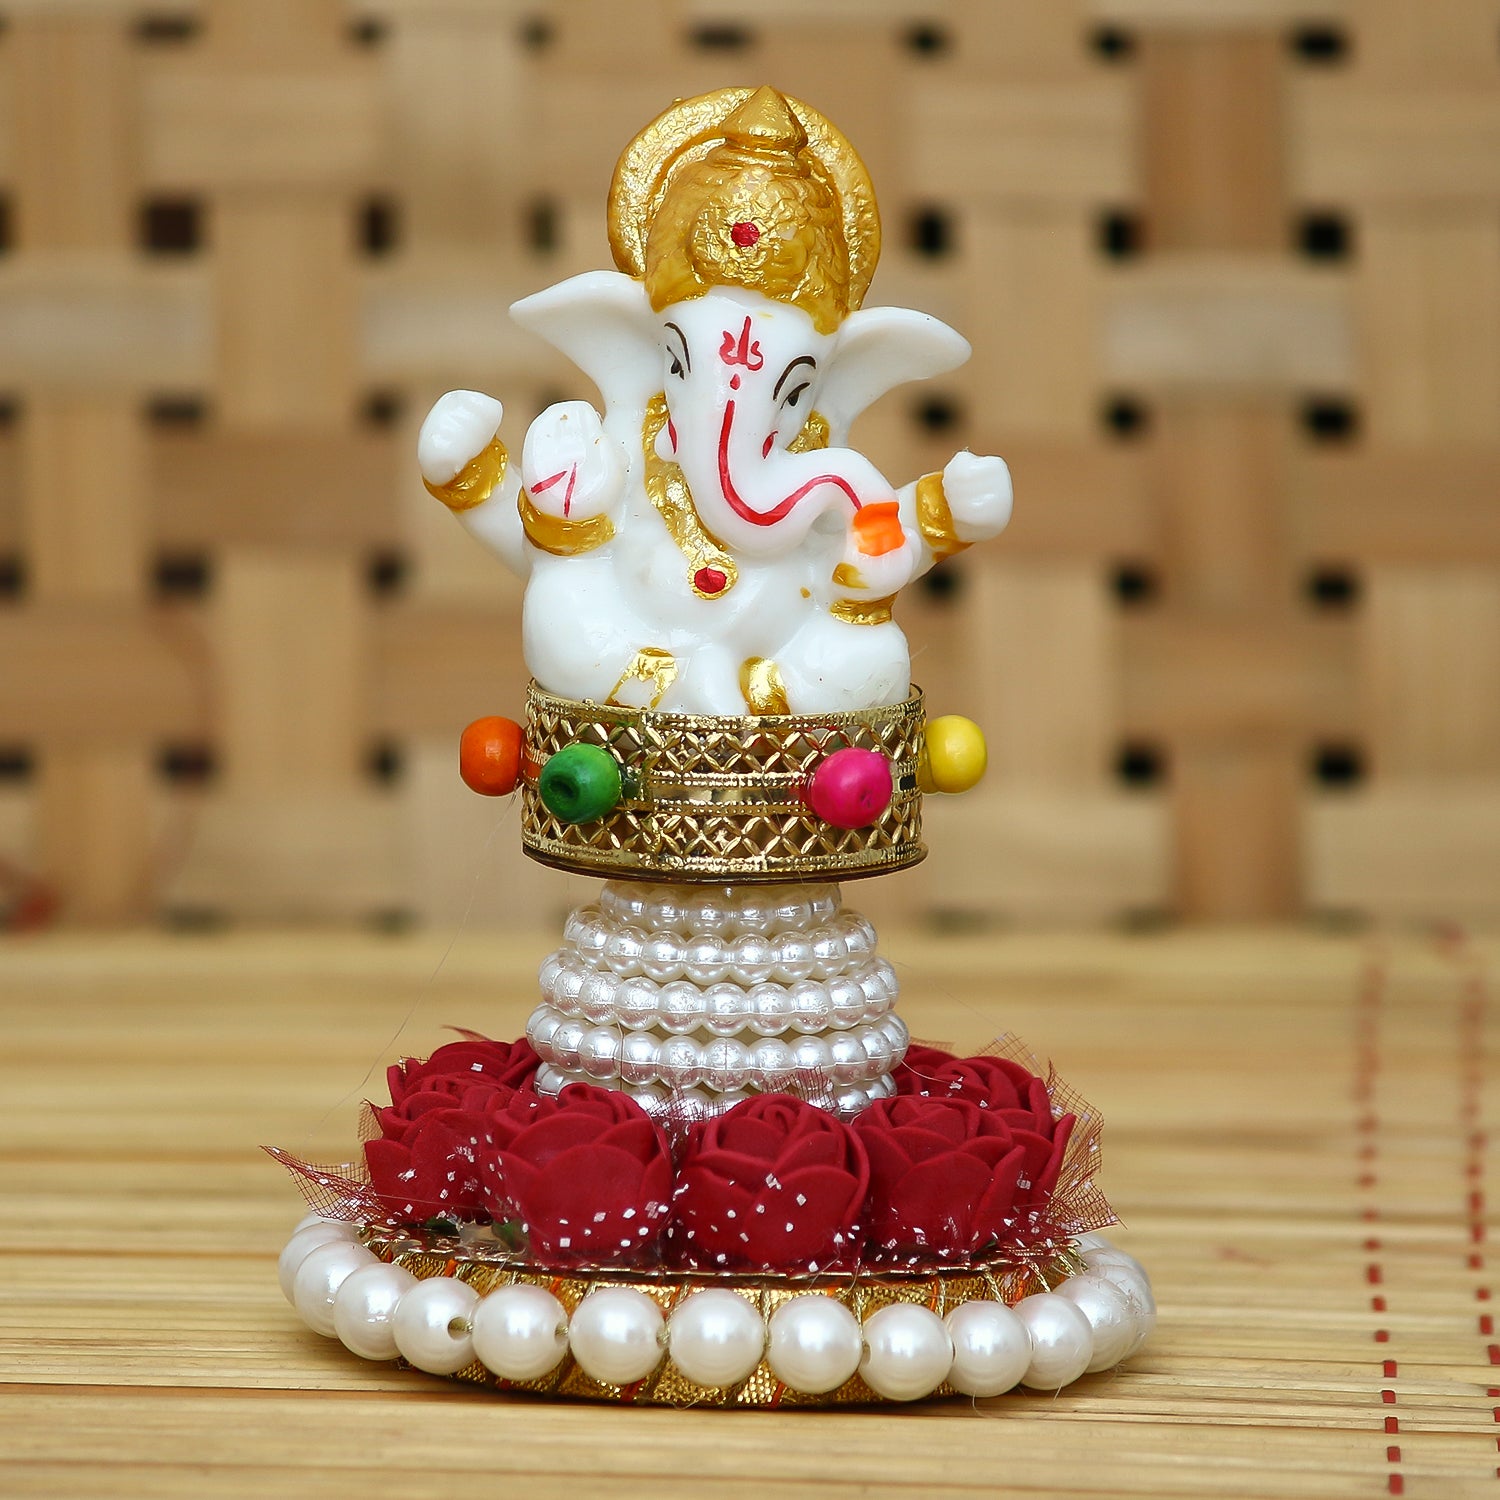 Polyresin Lord Ganesha Idol on Decorative Handcrafted Plate for Home, Office and Car Dashboard